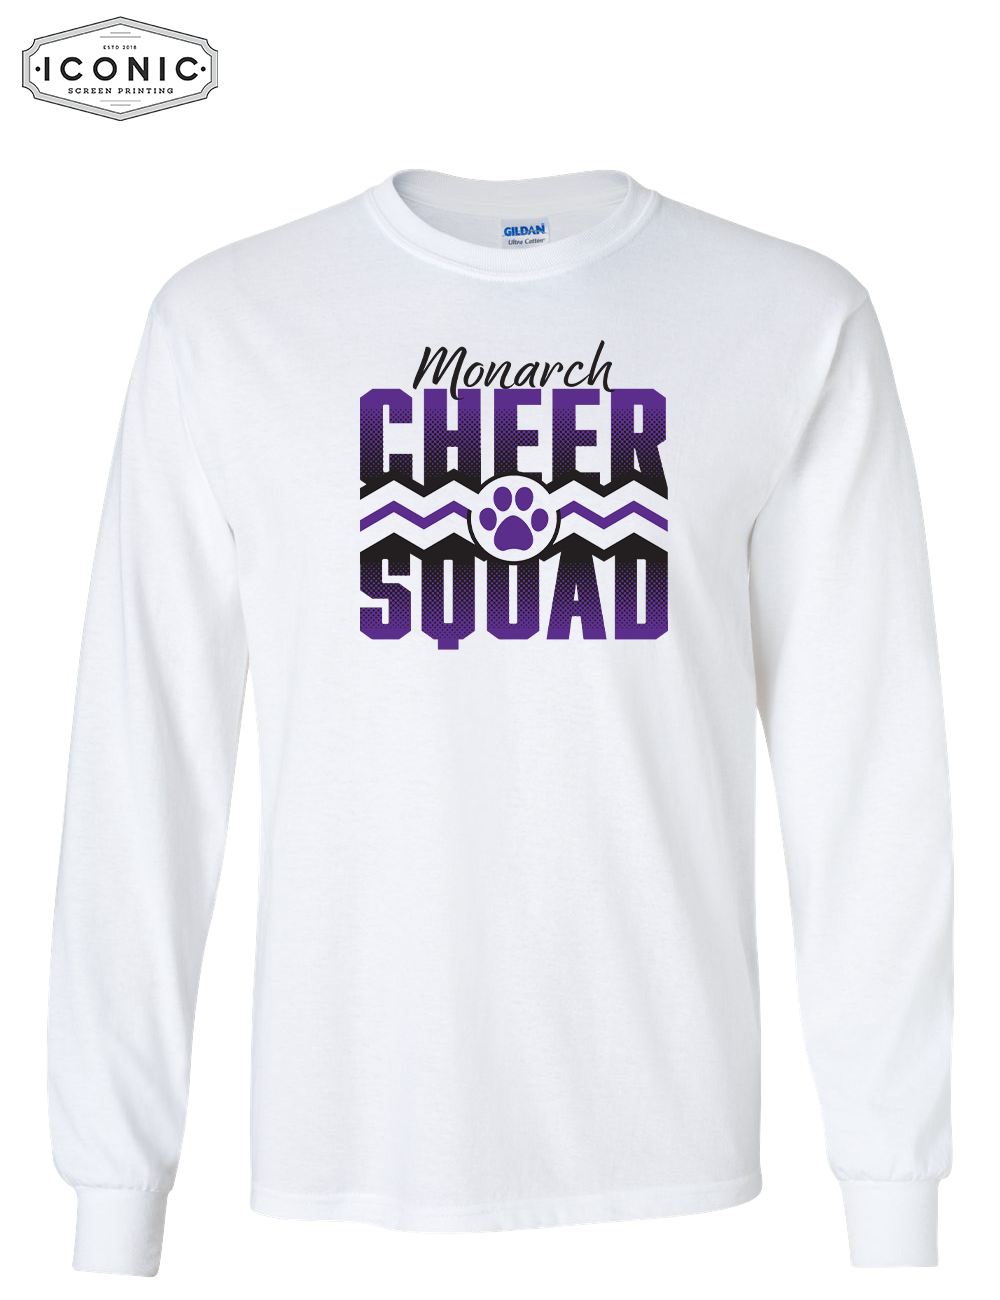 CHEER SQUAD - Ultra Cotton Long Sleeve